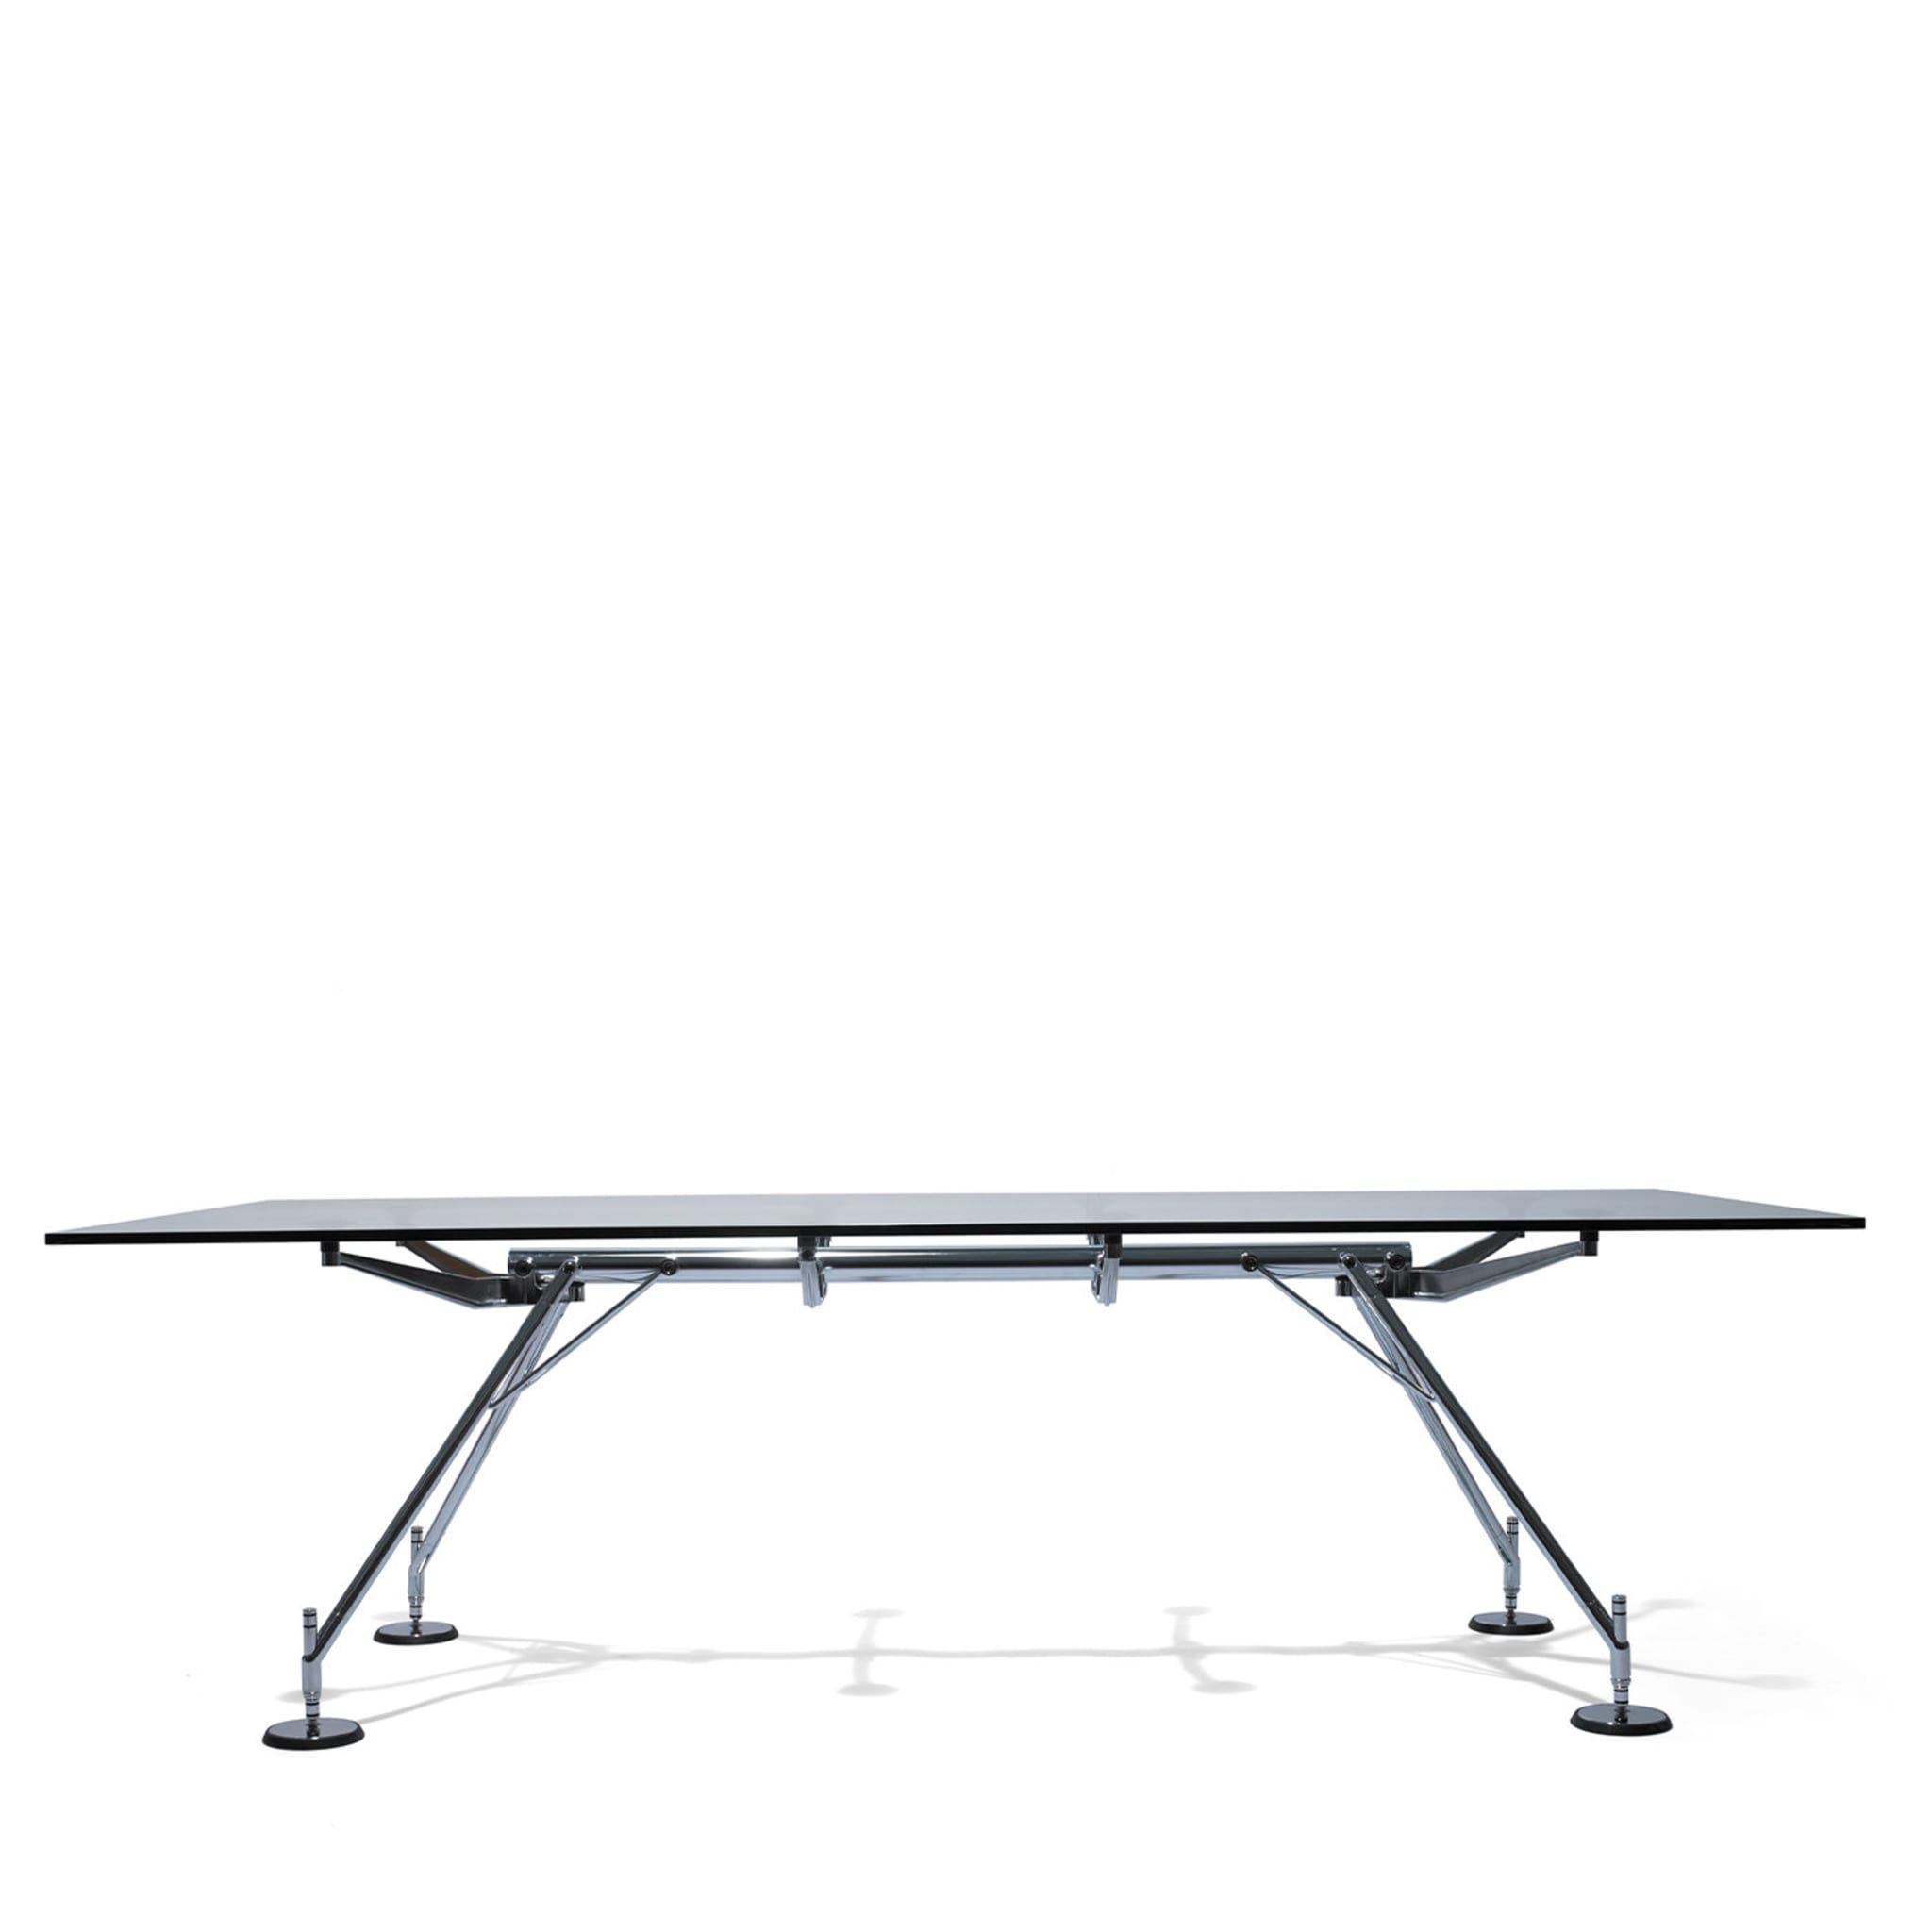 Nomos Chrome Table by Norman Foster - Alternative view 1